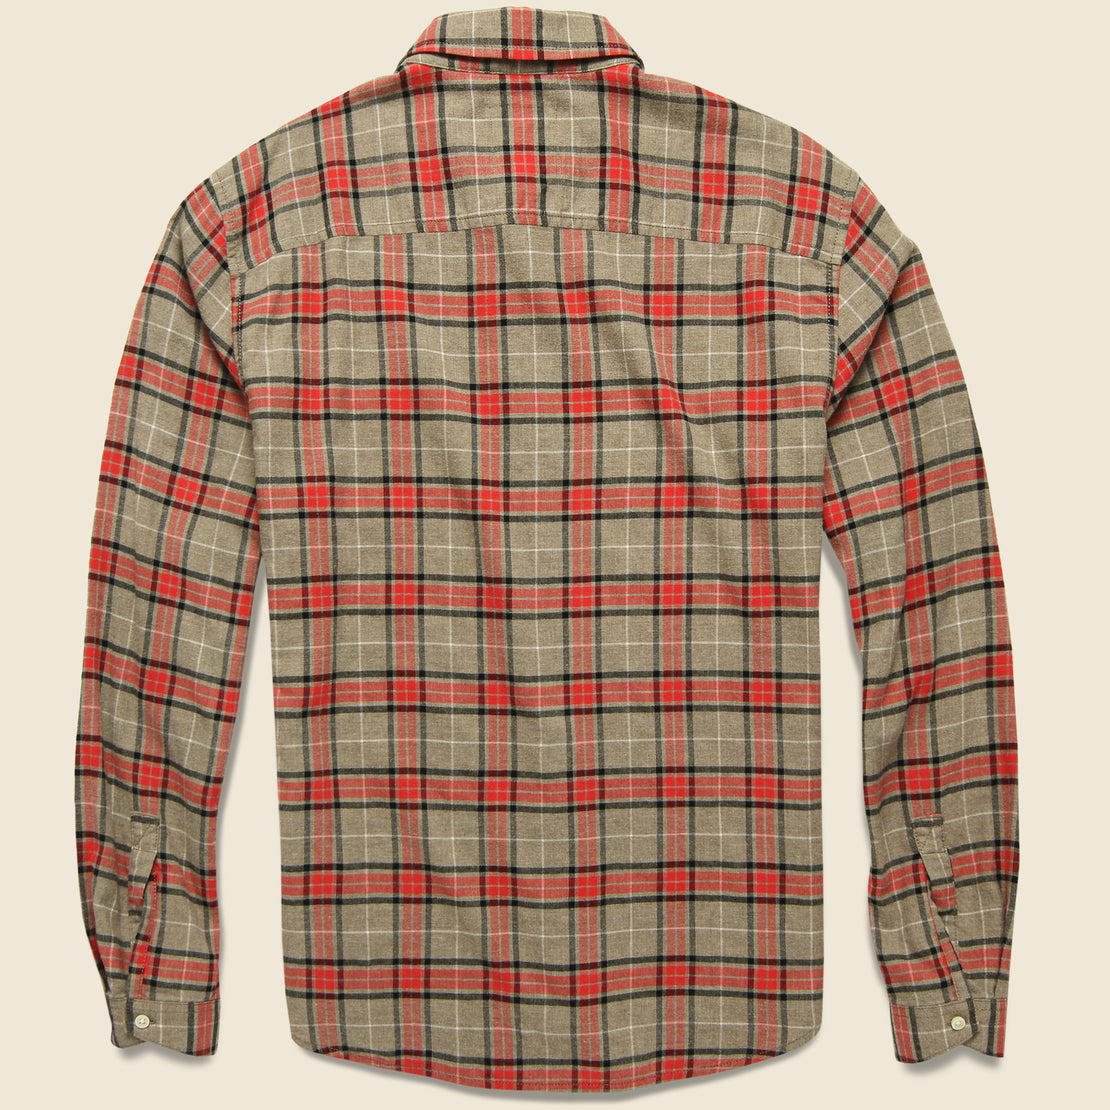 Tartan Flannel - Heather Portabello - Life After Denim - STAG Provisions - Tops - L/S Woven - Plaid